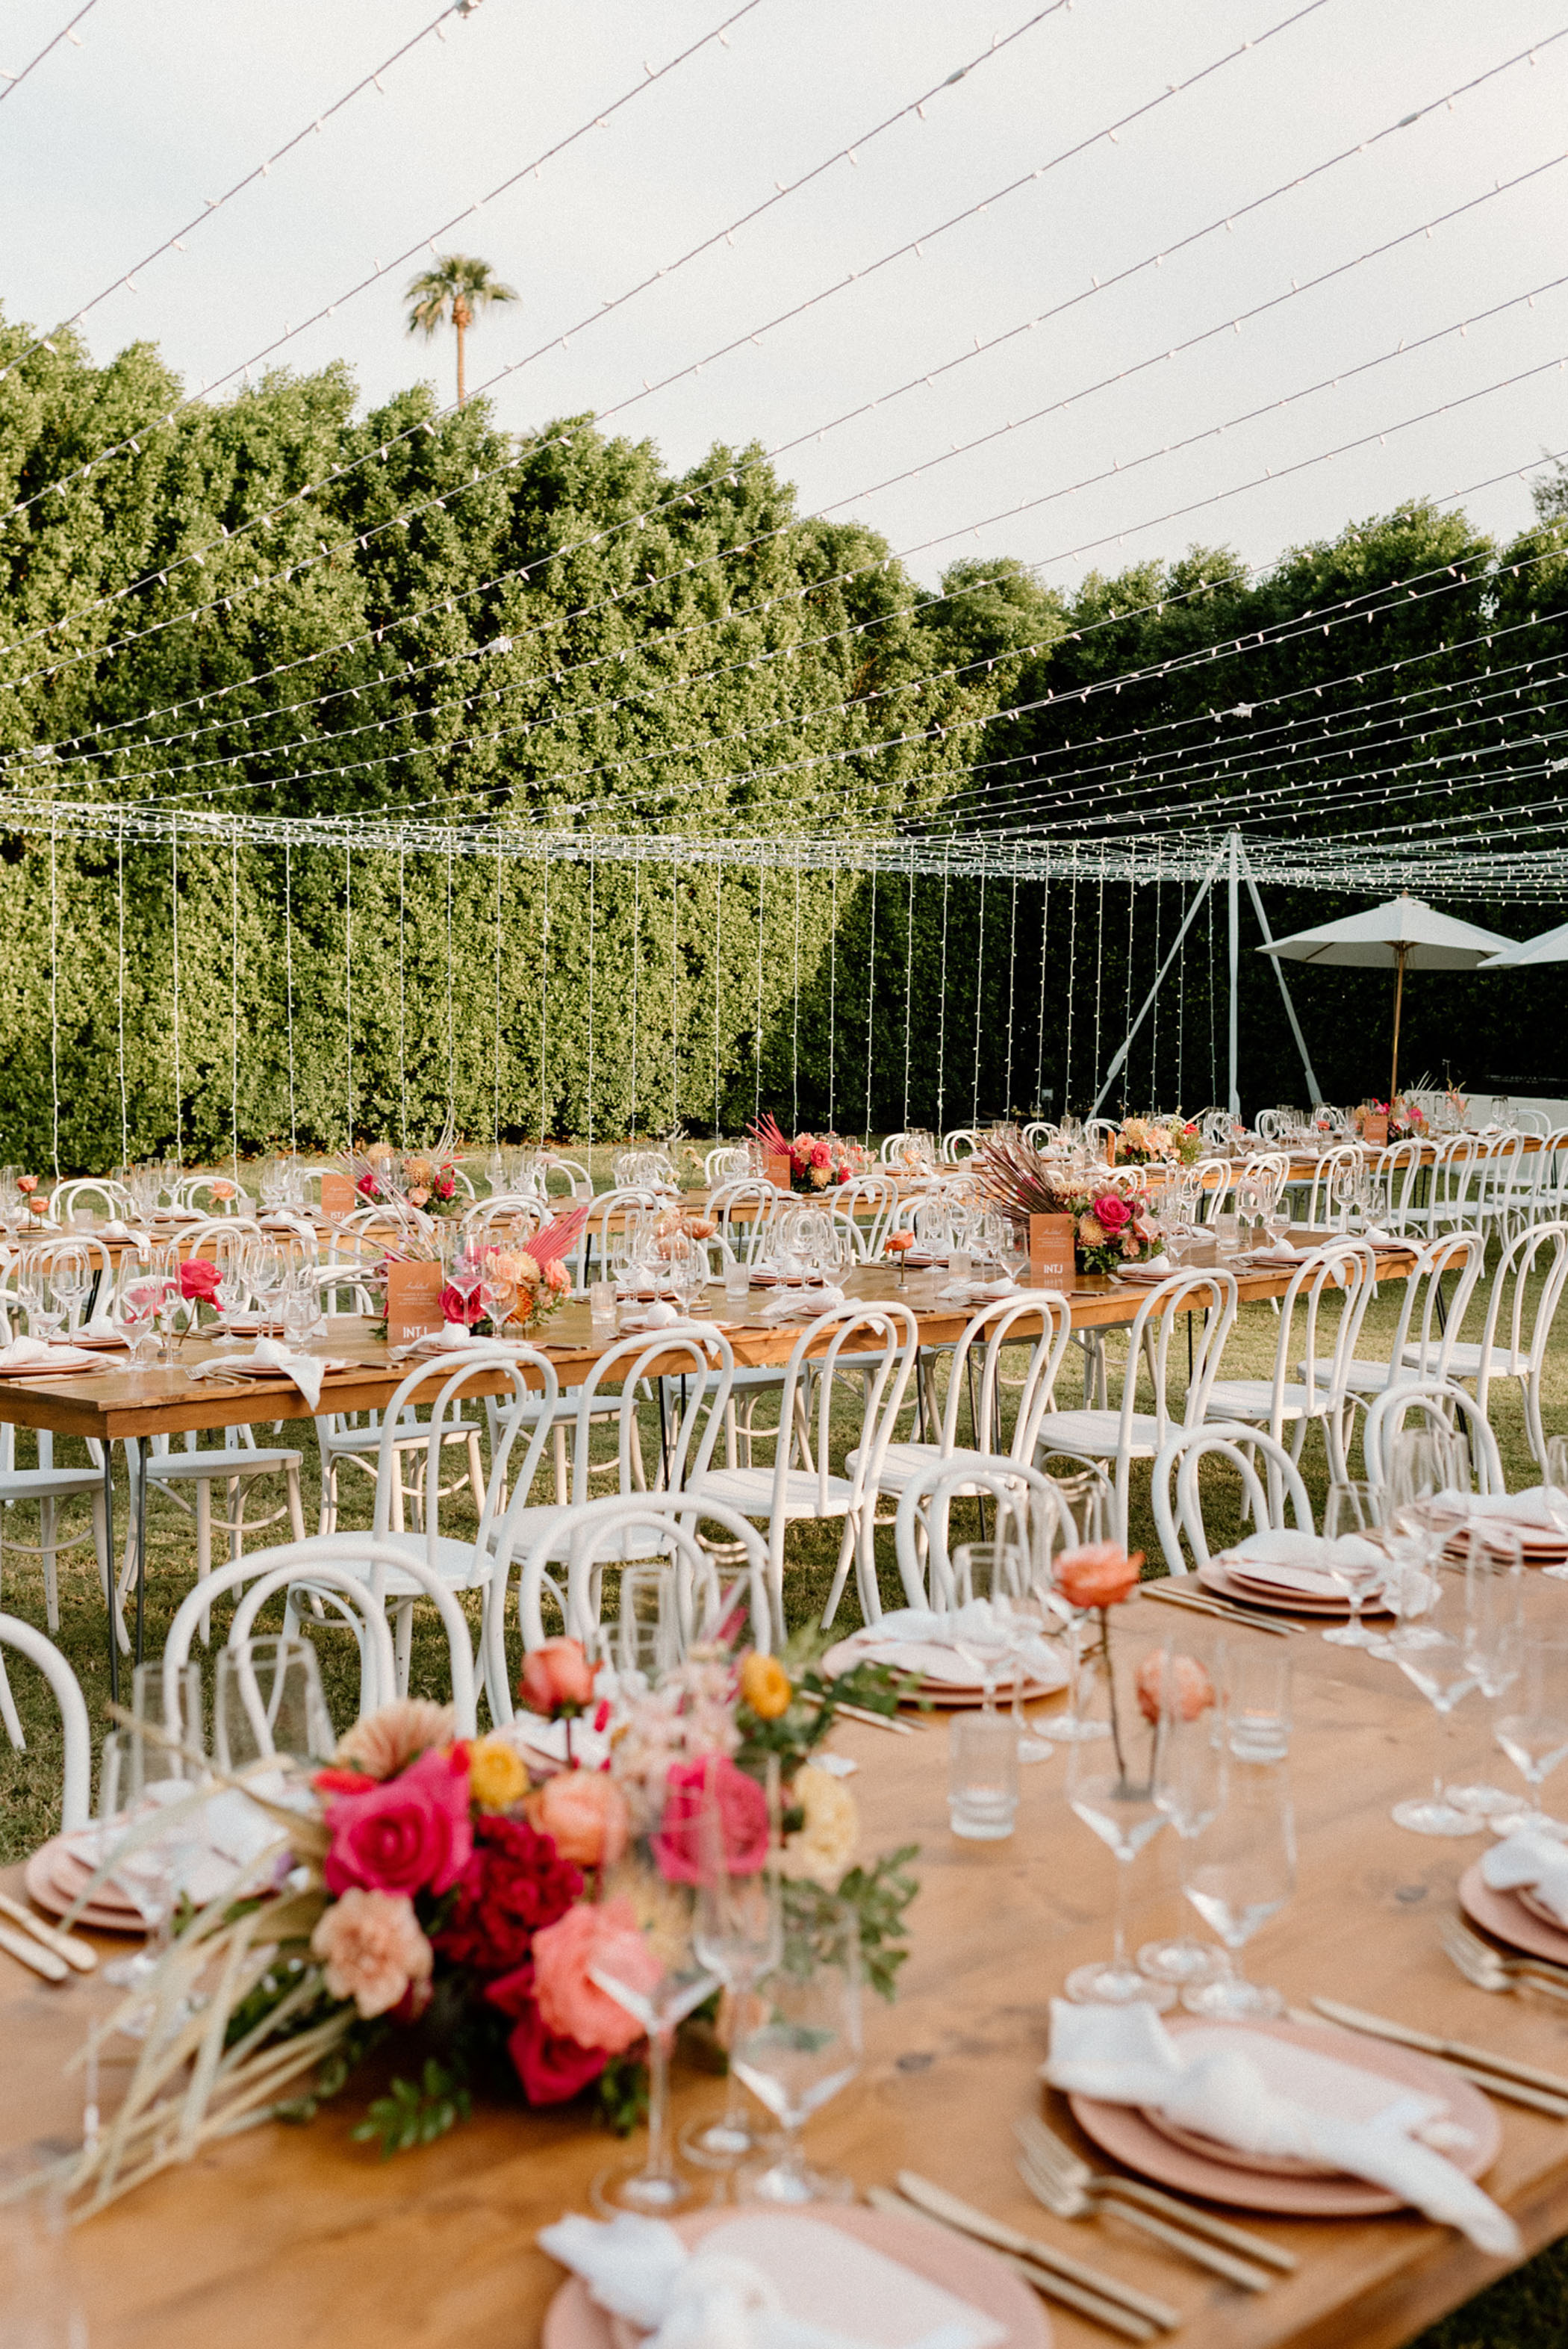 Colorful and Vibrant Palm Springs Wedding Reception Decor